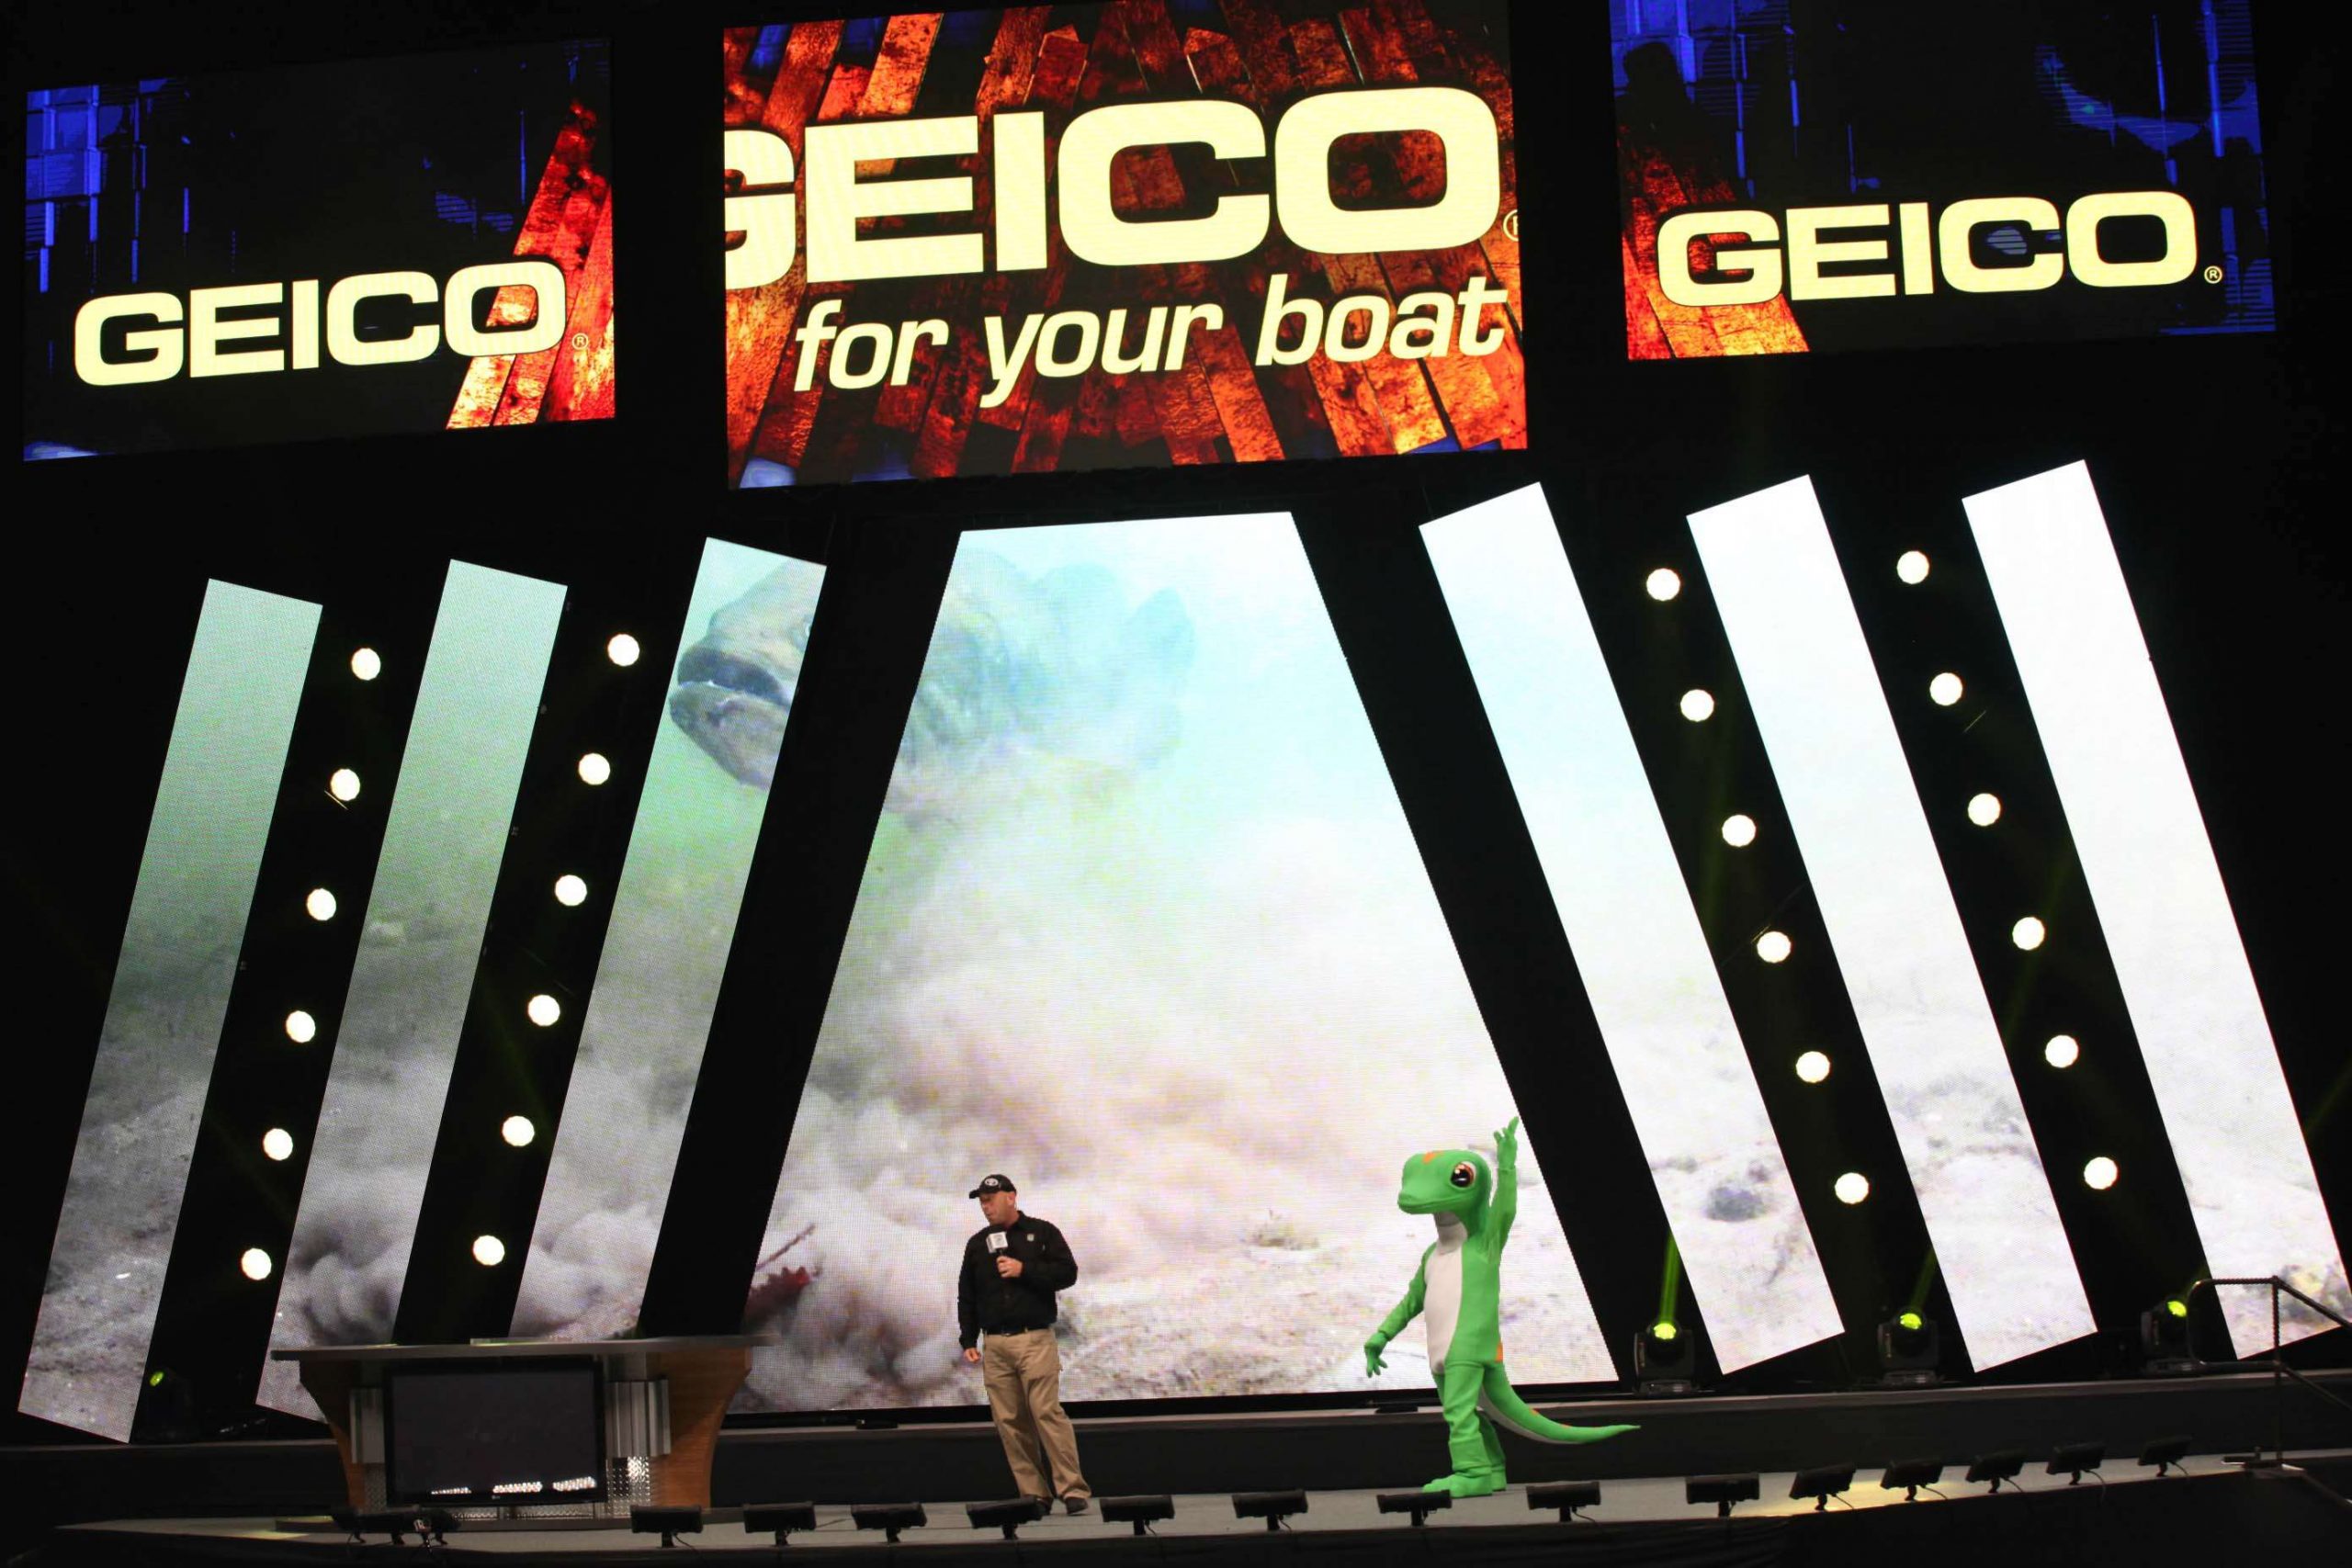 Then it was time for the Gecko's appearance on the GEICO Bassmaster Classic stage.